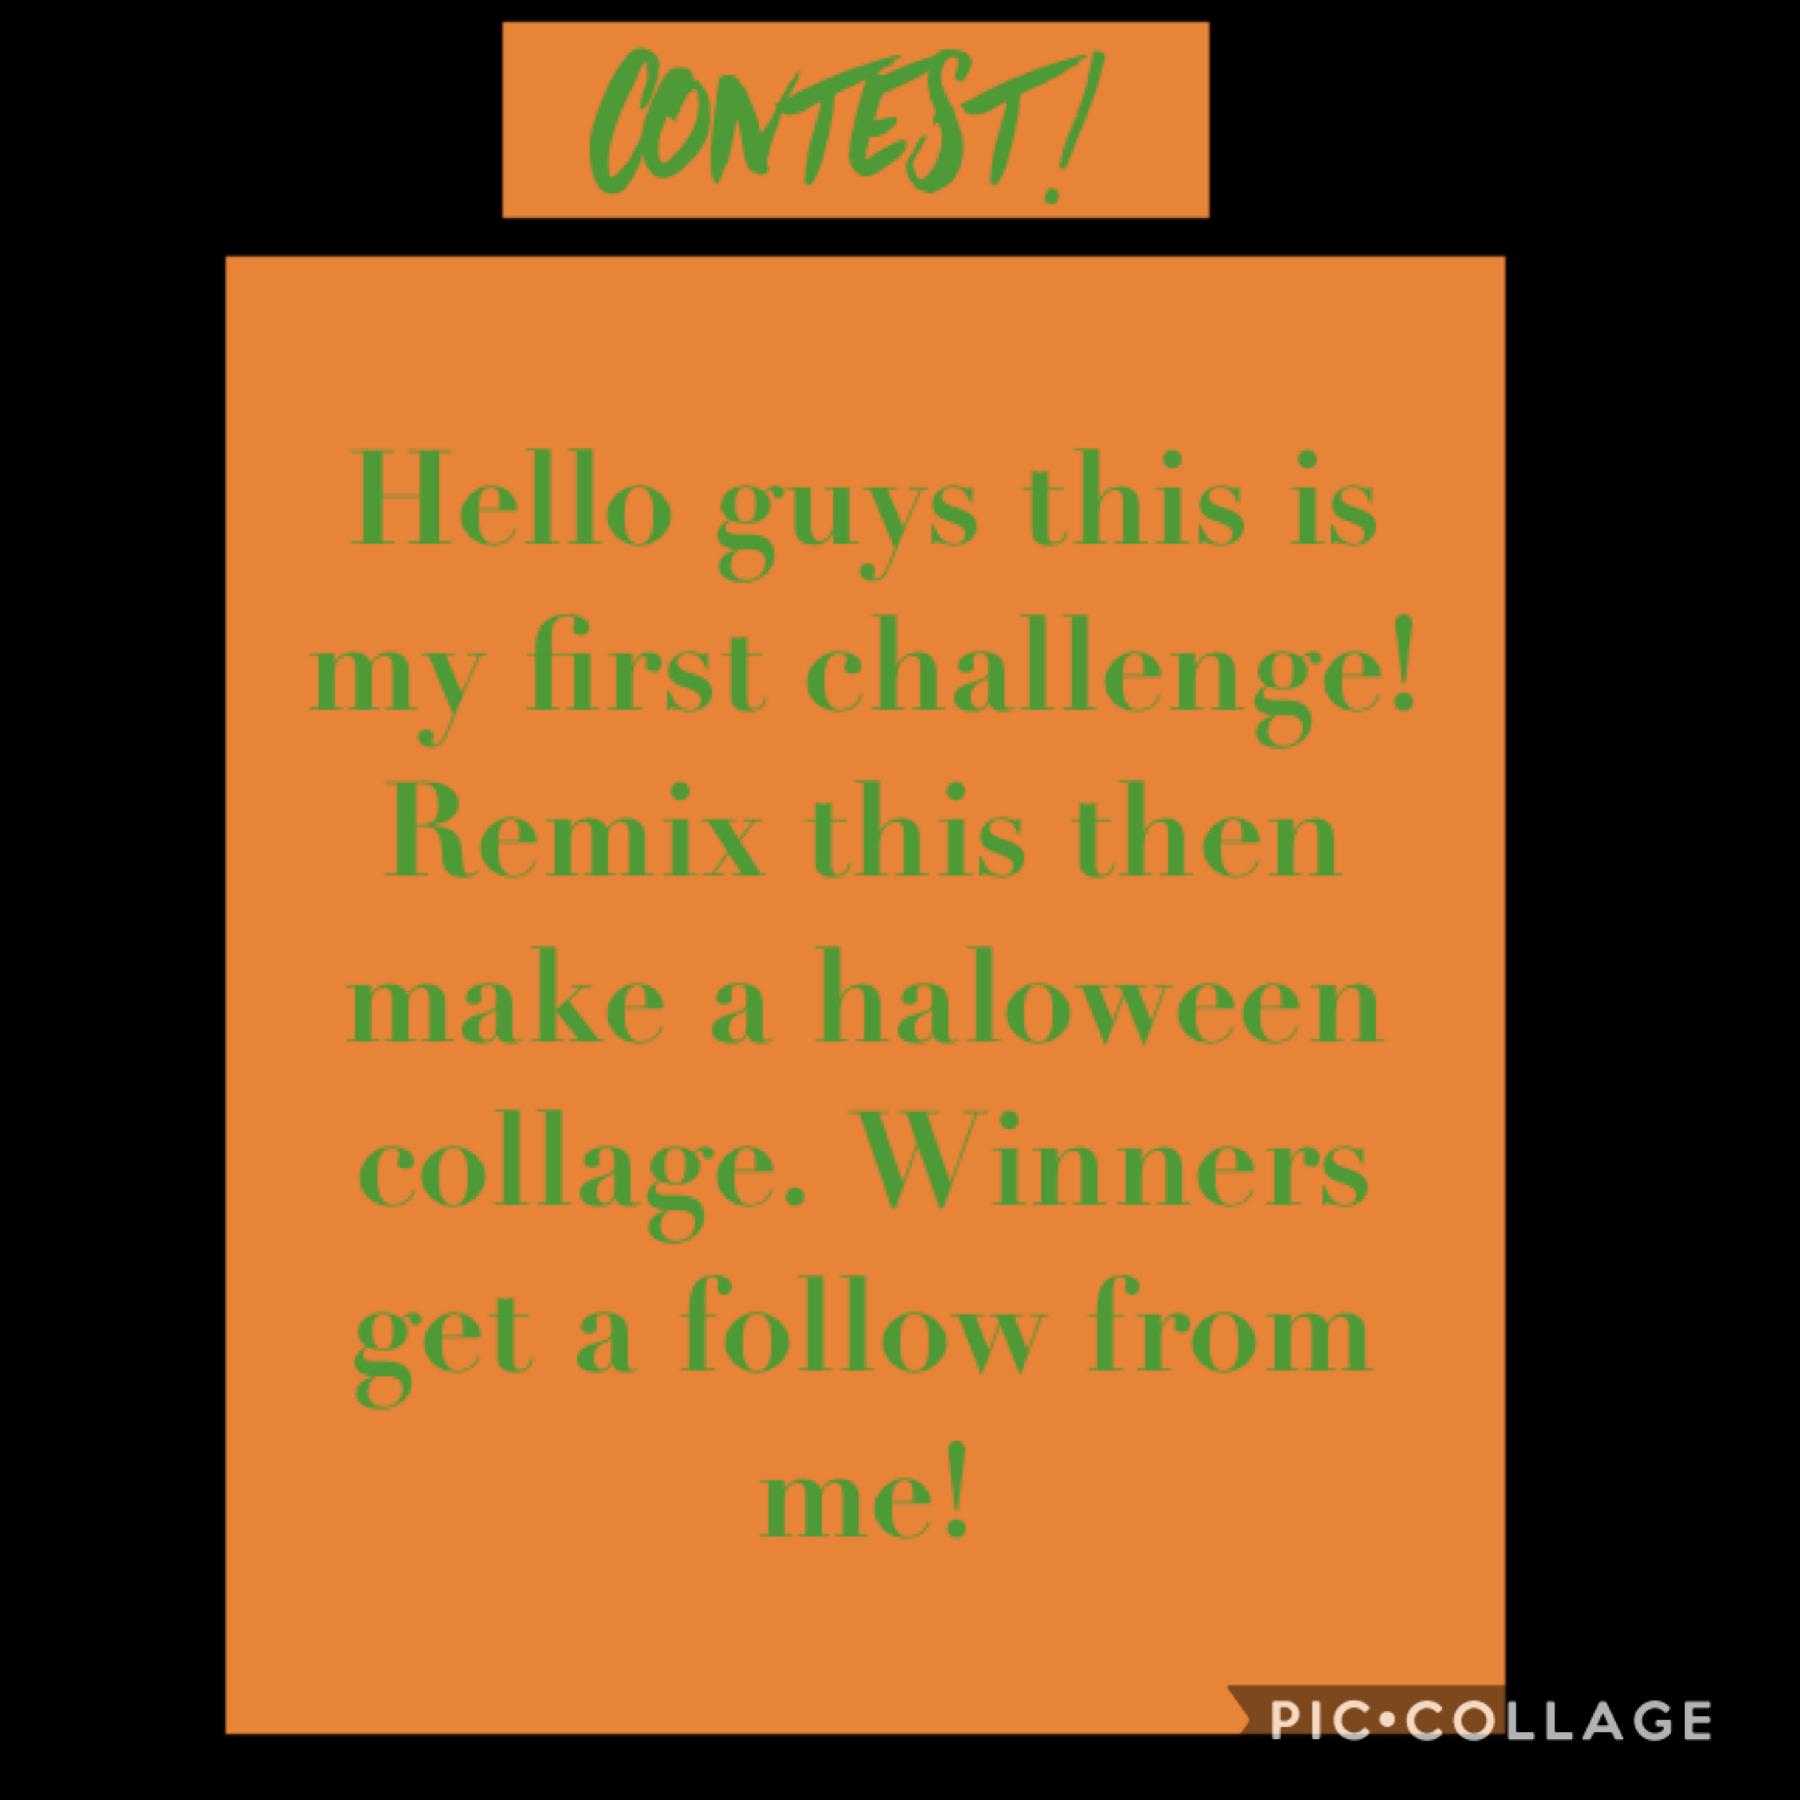 First contest!